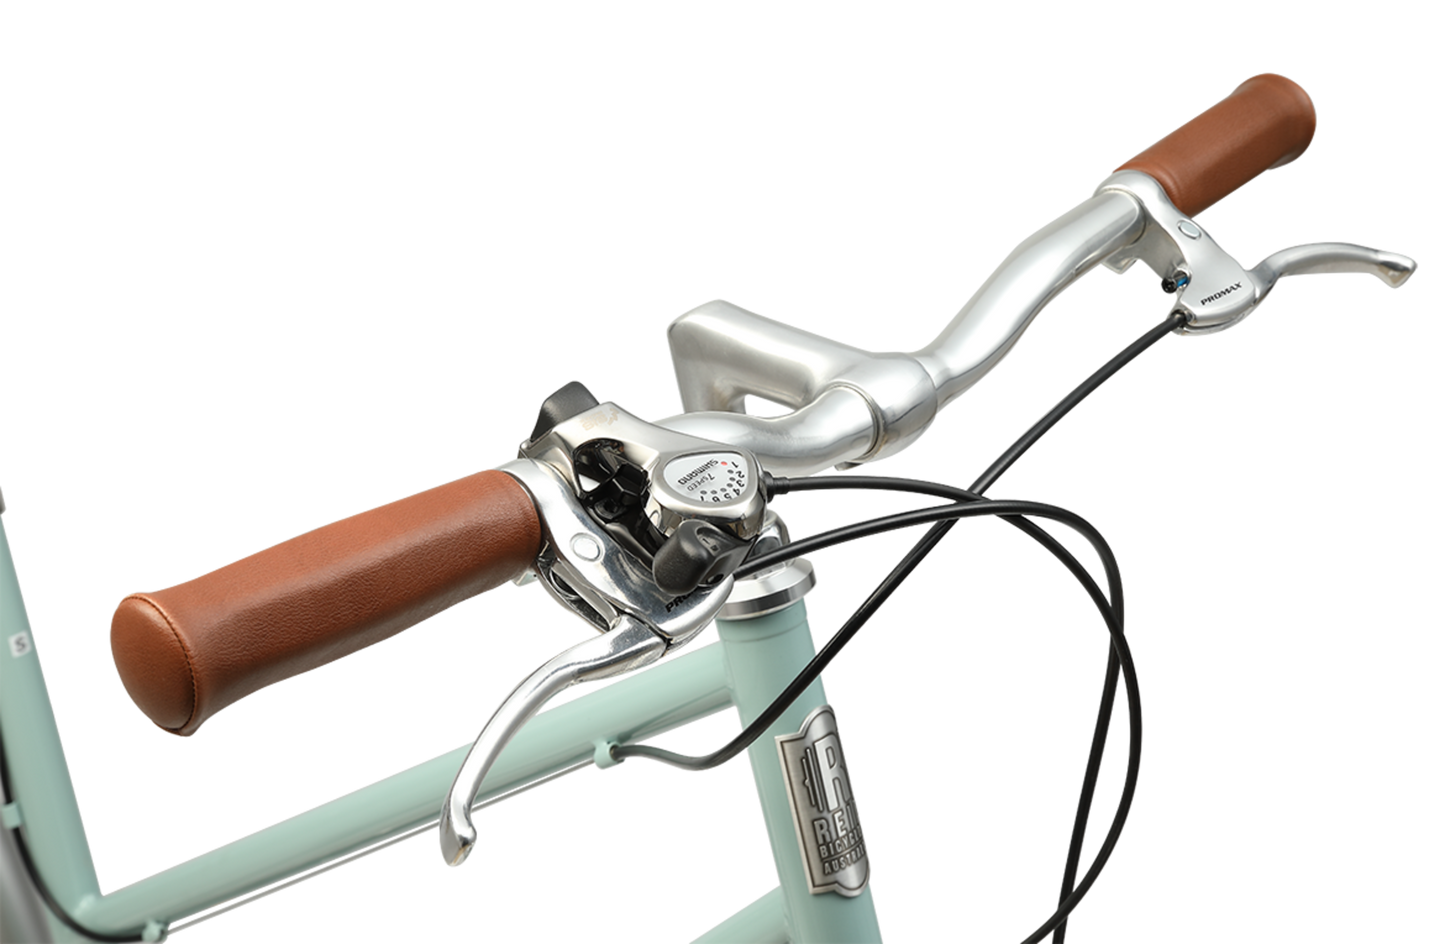 Ladies Esprit Vintage Bike in Sage showing vintage style handlebars and Shimano shifters from Reid Cycles Australia